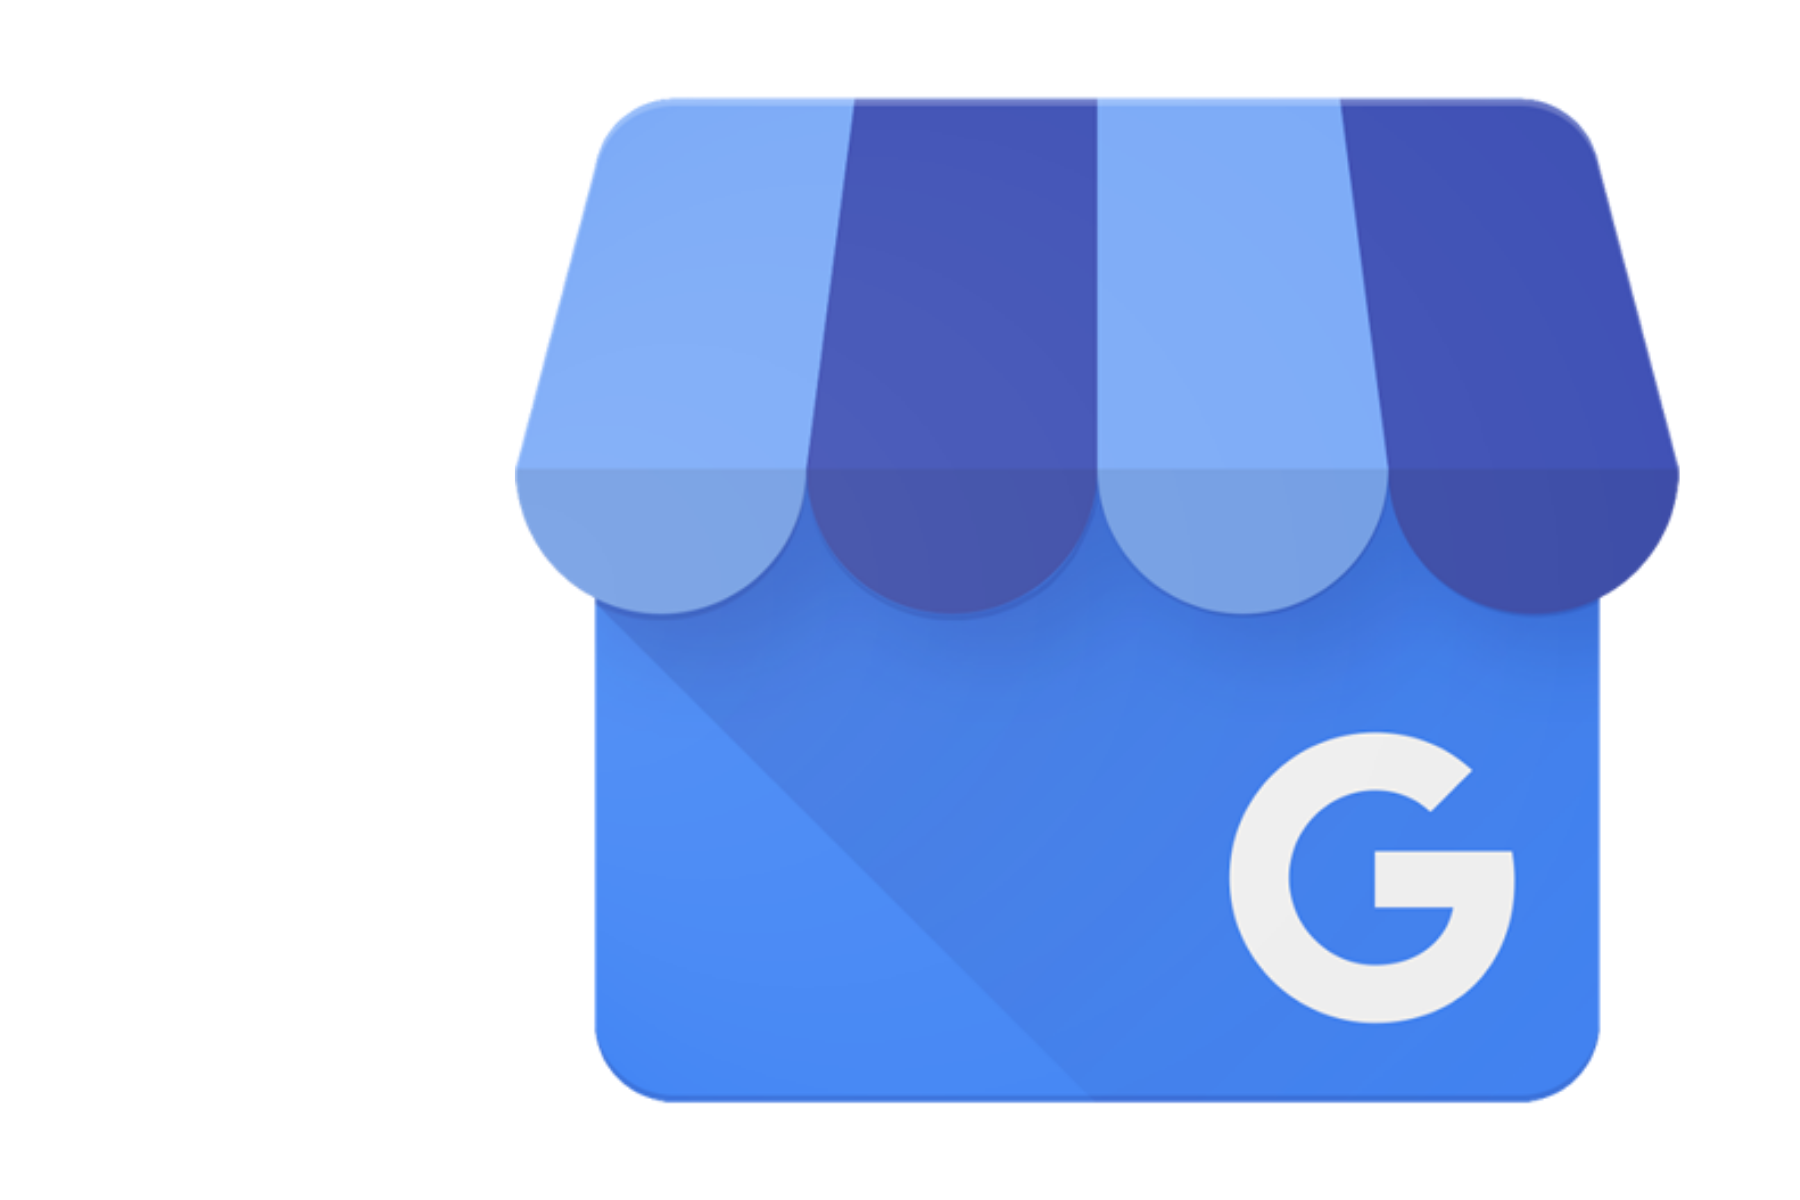 Image of the Google My Business logo.